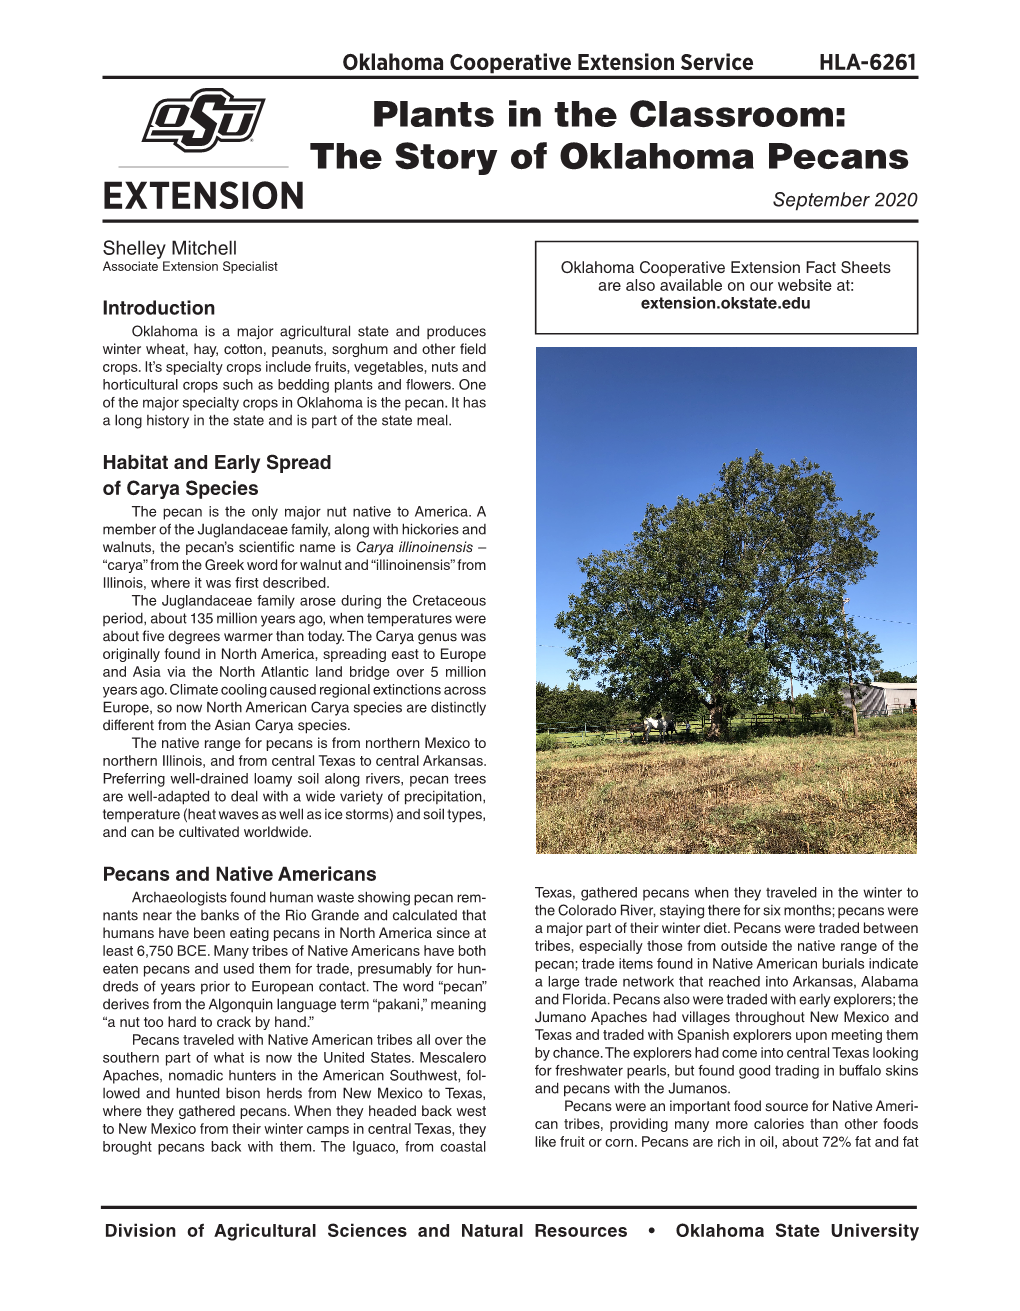 Plants in the Classroom: the Story of Oklahoma Pecans September 2020